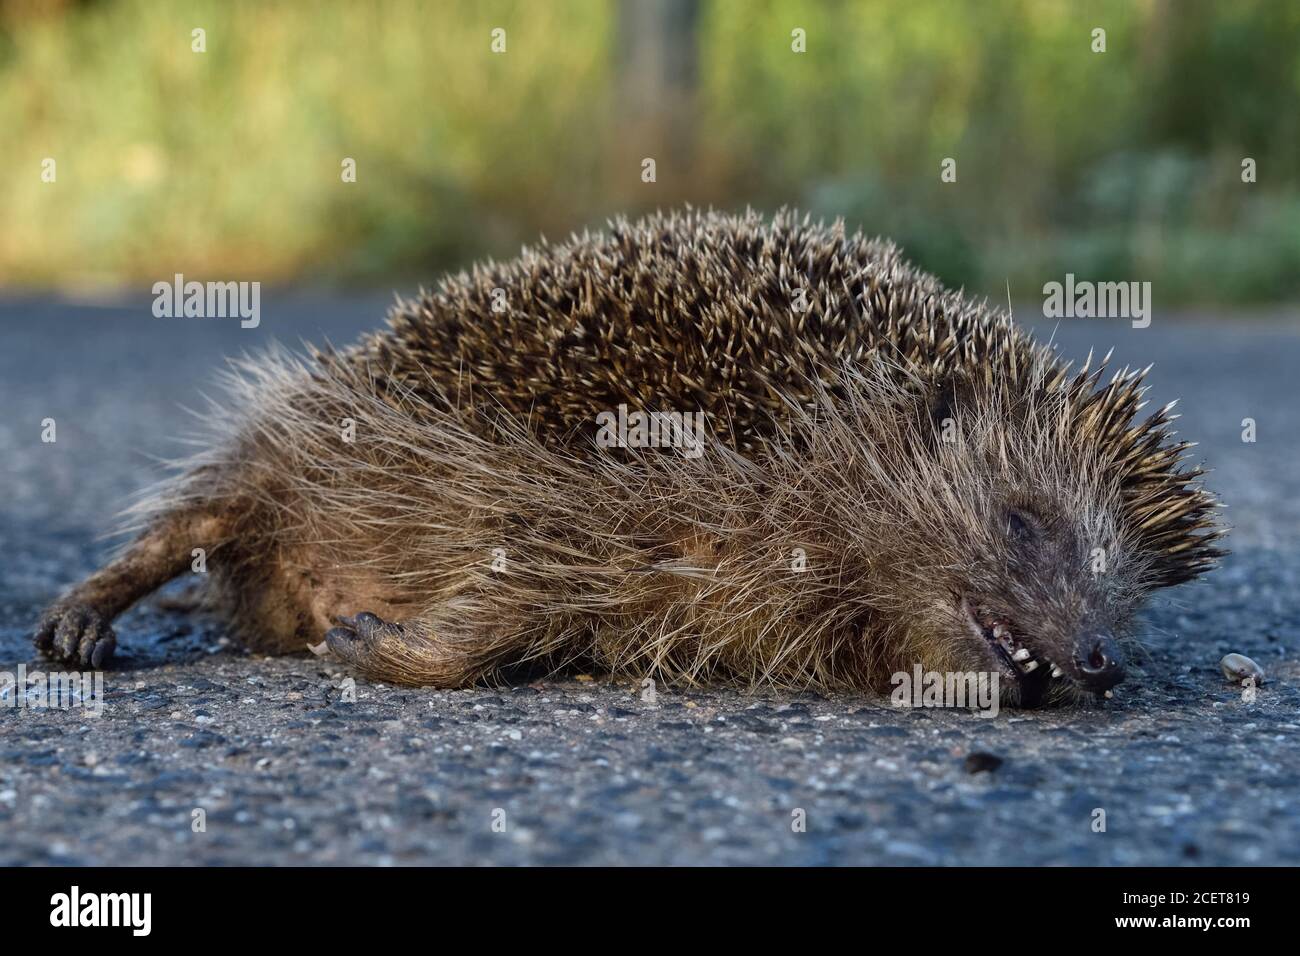 Hedgehog ( Erinaceus europaeus ), dead, squashed on the road, roadkill, endangered, run over by road traffic, traffic victim, wildlife, Europe. Stock Photo